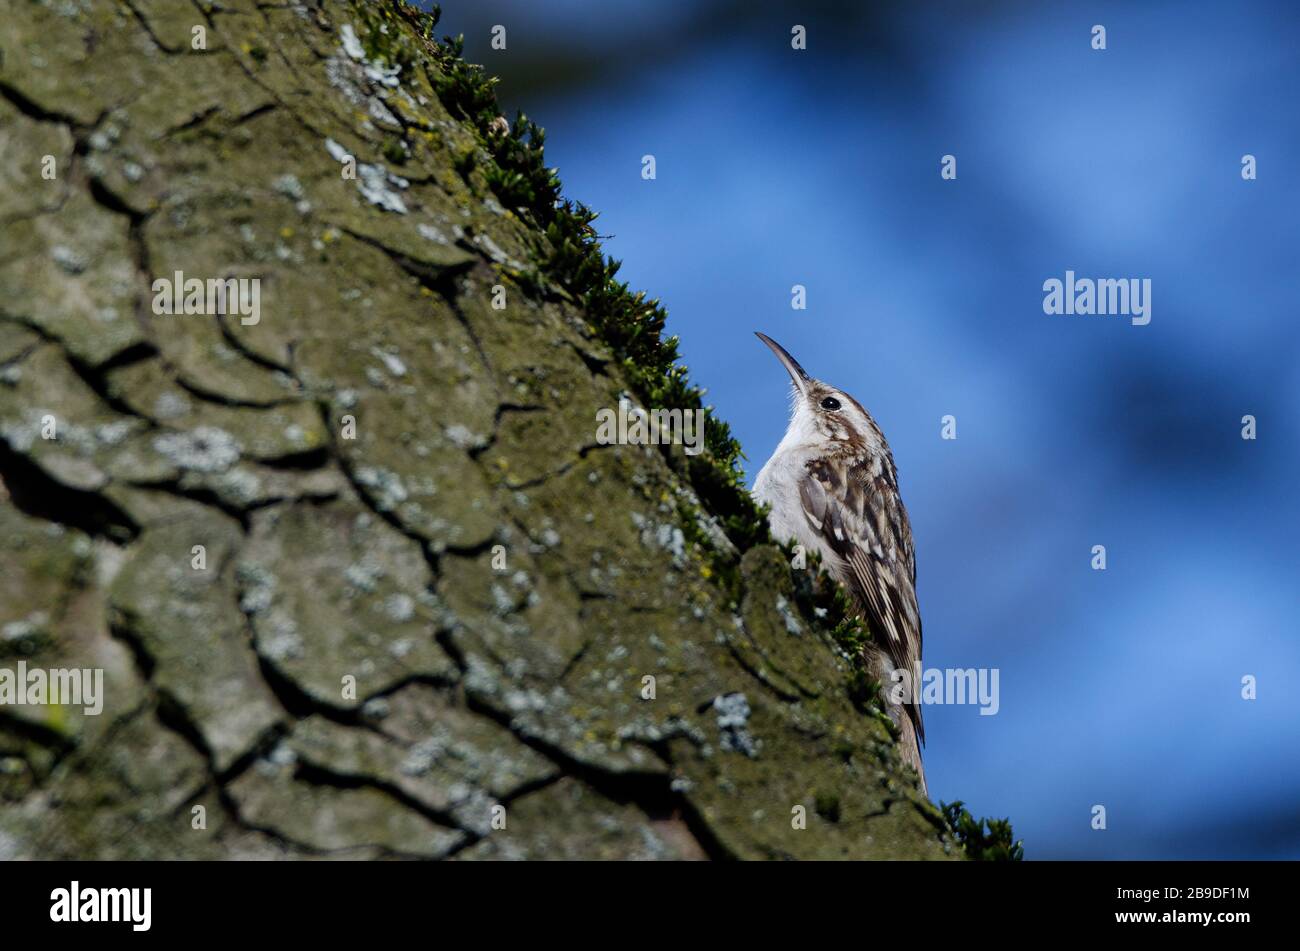 Certhiidae a treecreeper sitting on a  tree trunk against a blurred blue background Stock Photo